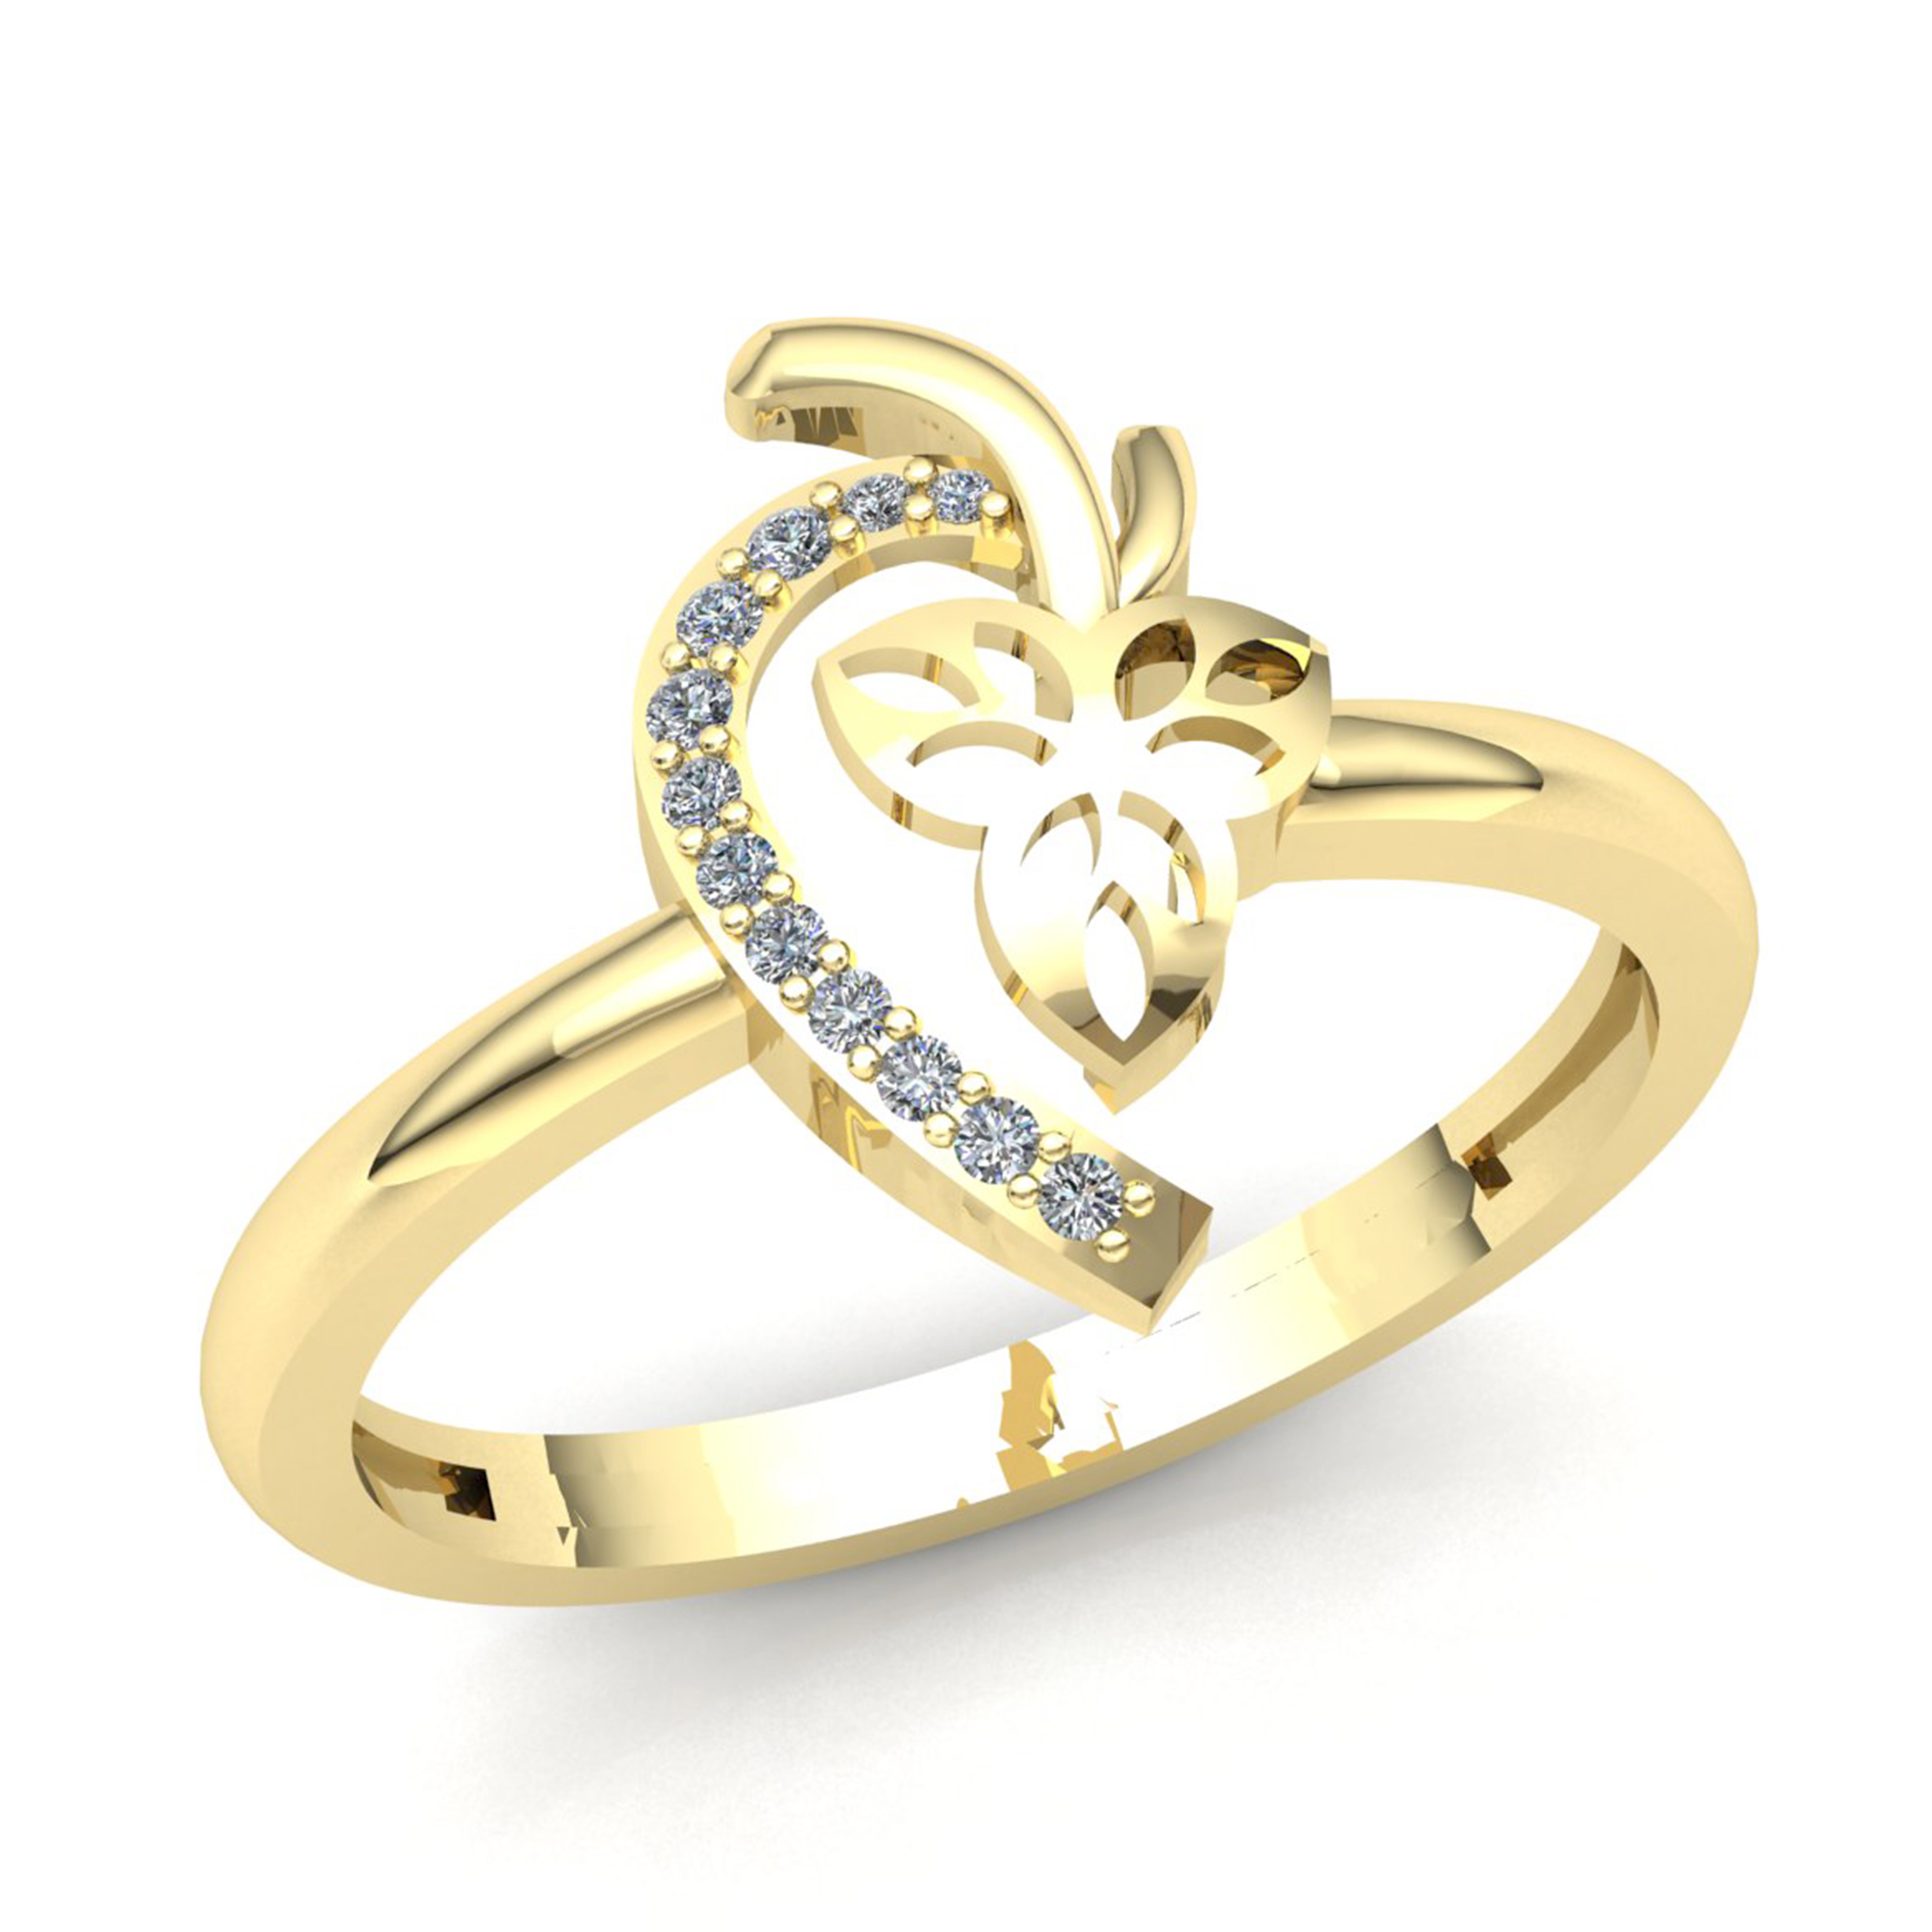 Jewel We Sell 0.15ctw Round Cut Diamond Ladies Bridal Leaf Heart Anniversary Right Hand Ring 18k Rose, White, or Yellow Gold F VS1